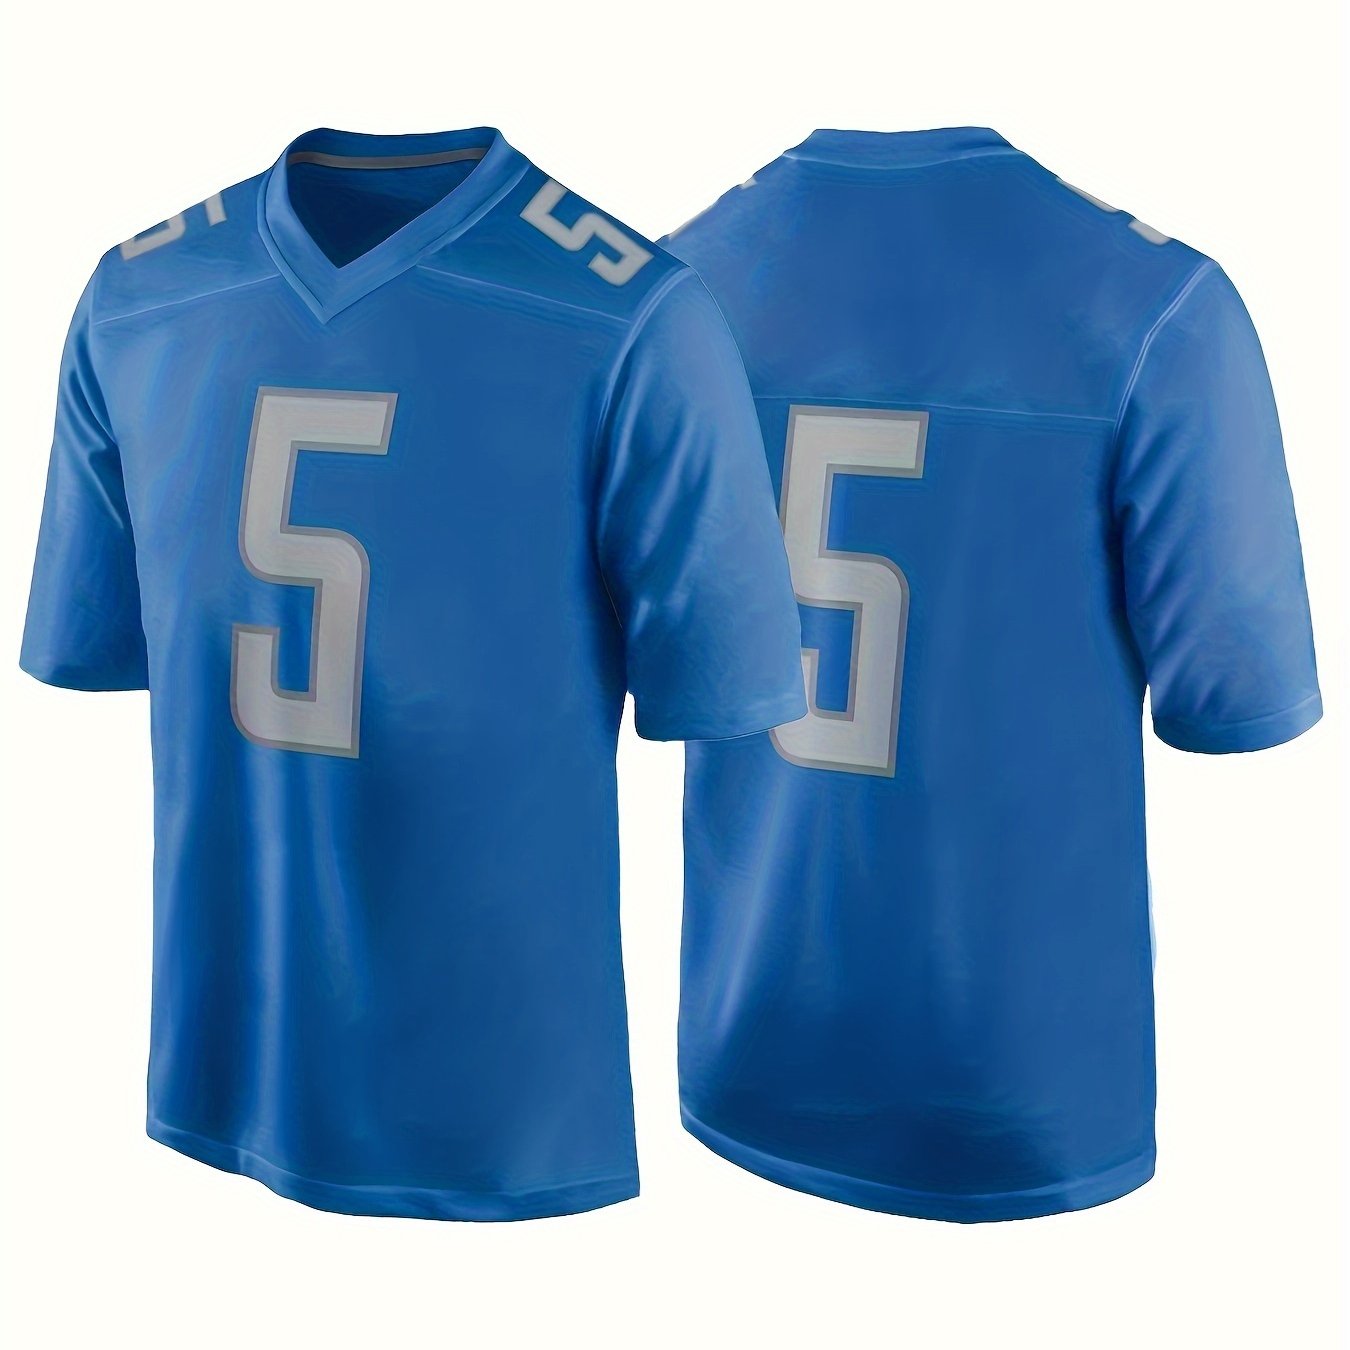 mens 5 american football jersey v neck short sleeve breathable jersey tops for game day outdoor clothing